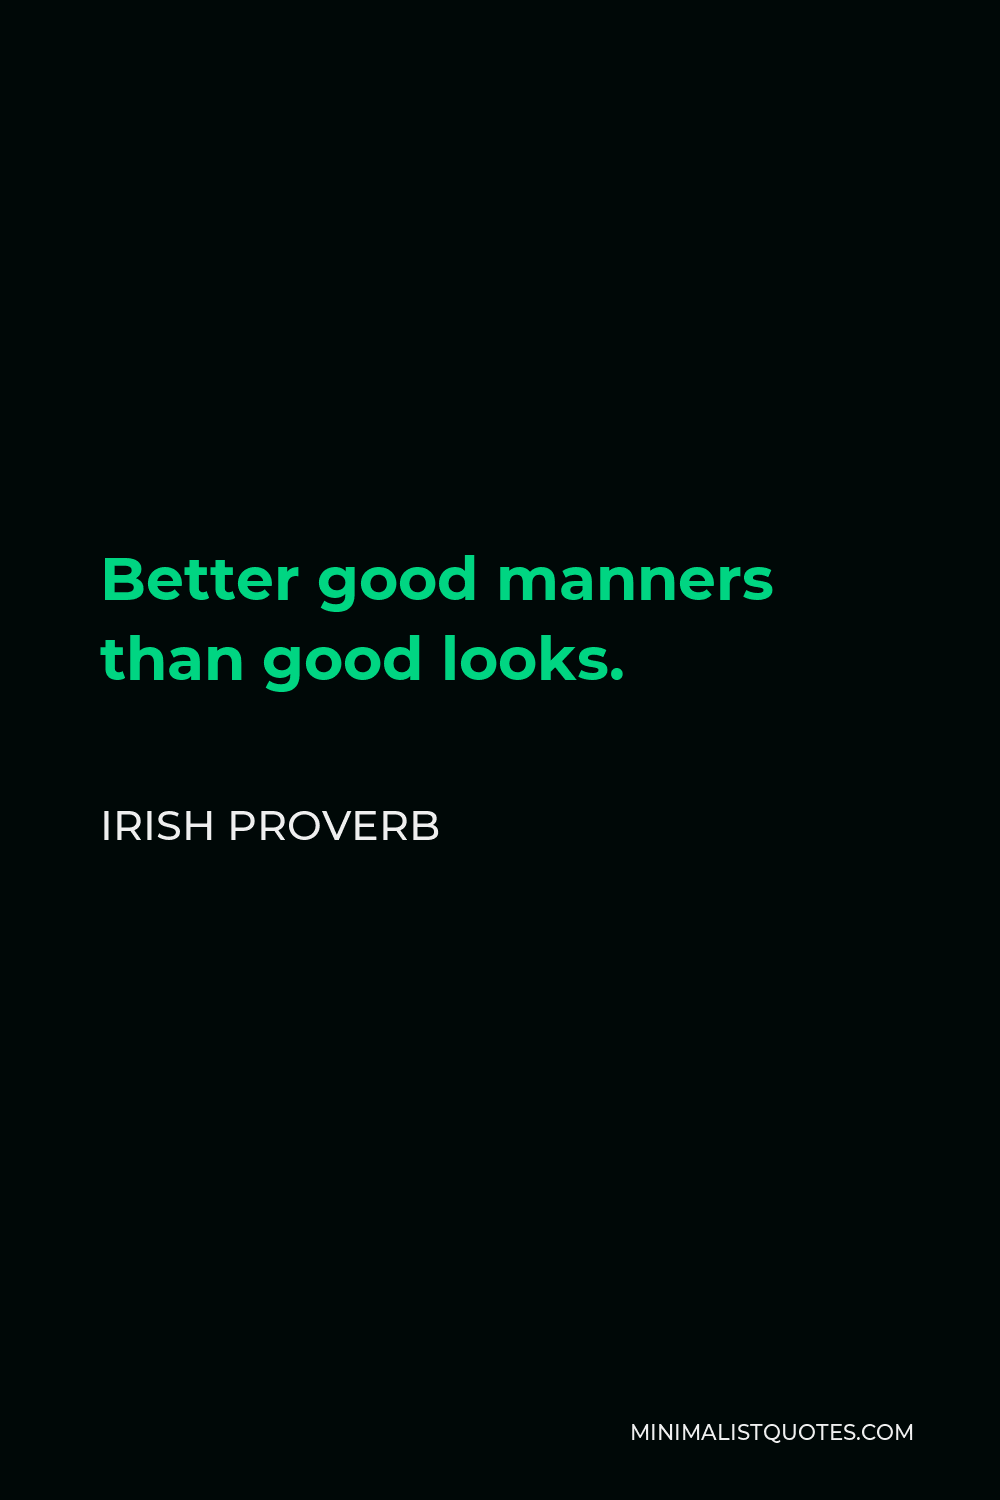 Irish Proverb Quote - Better good manners than good looks.